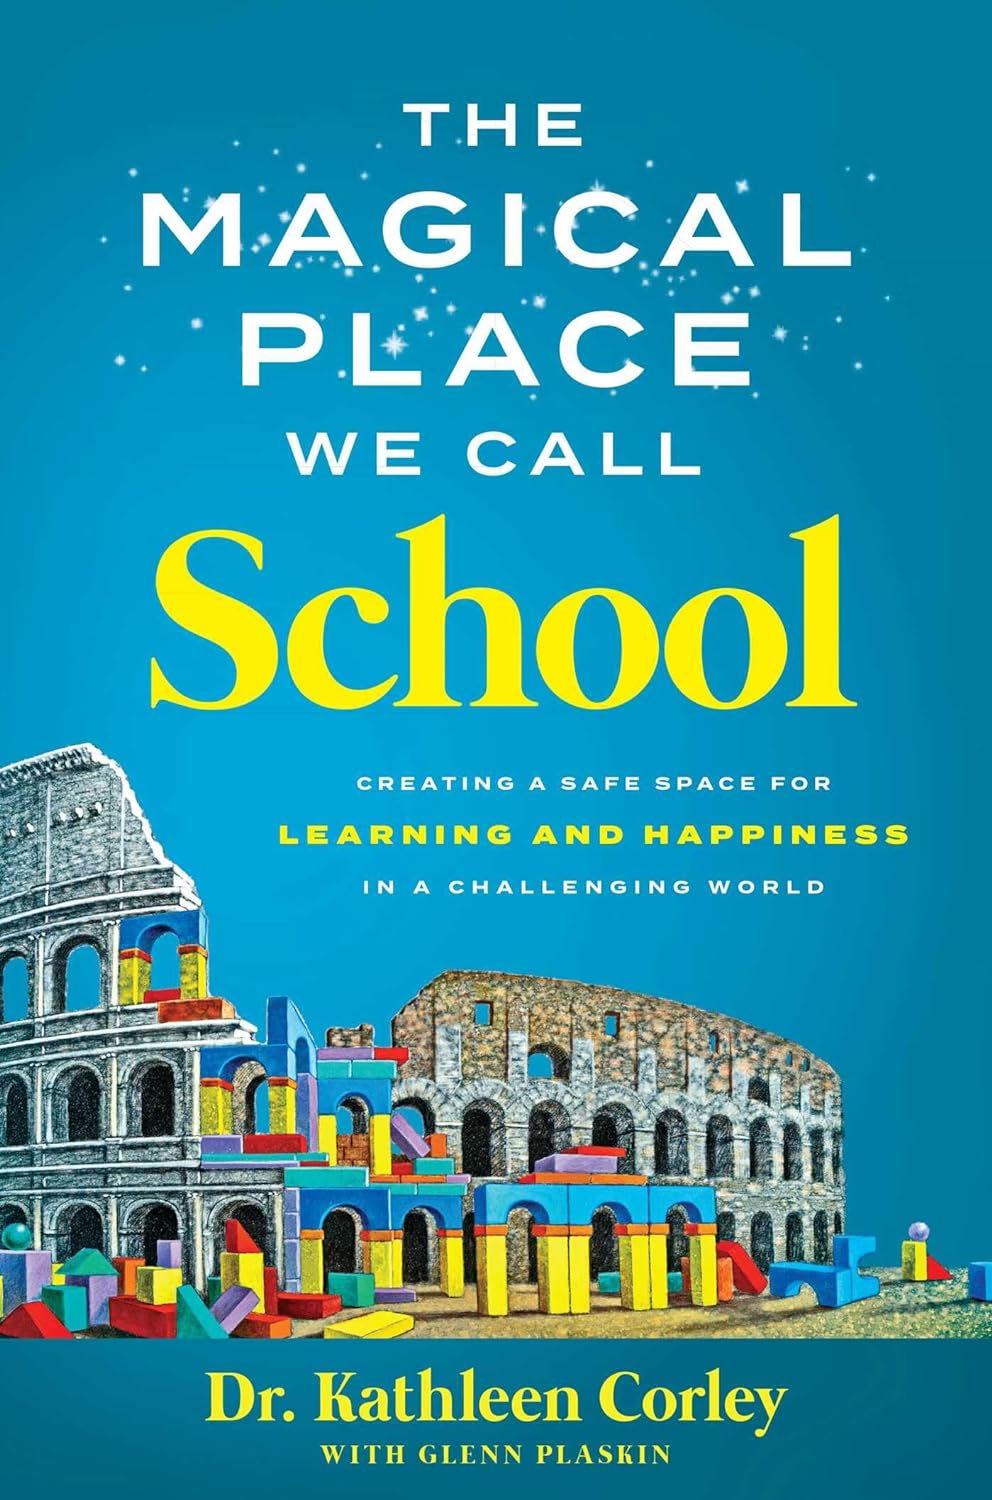 The Magical Place We Call School by Dr. Kathleen Corley